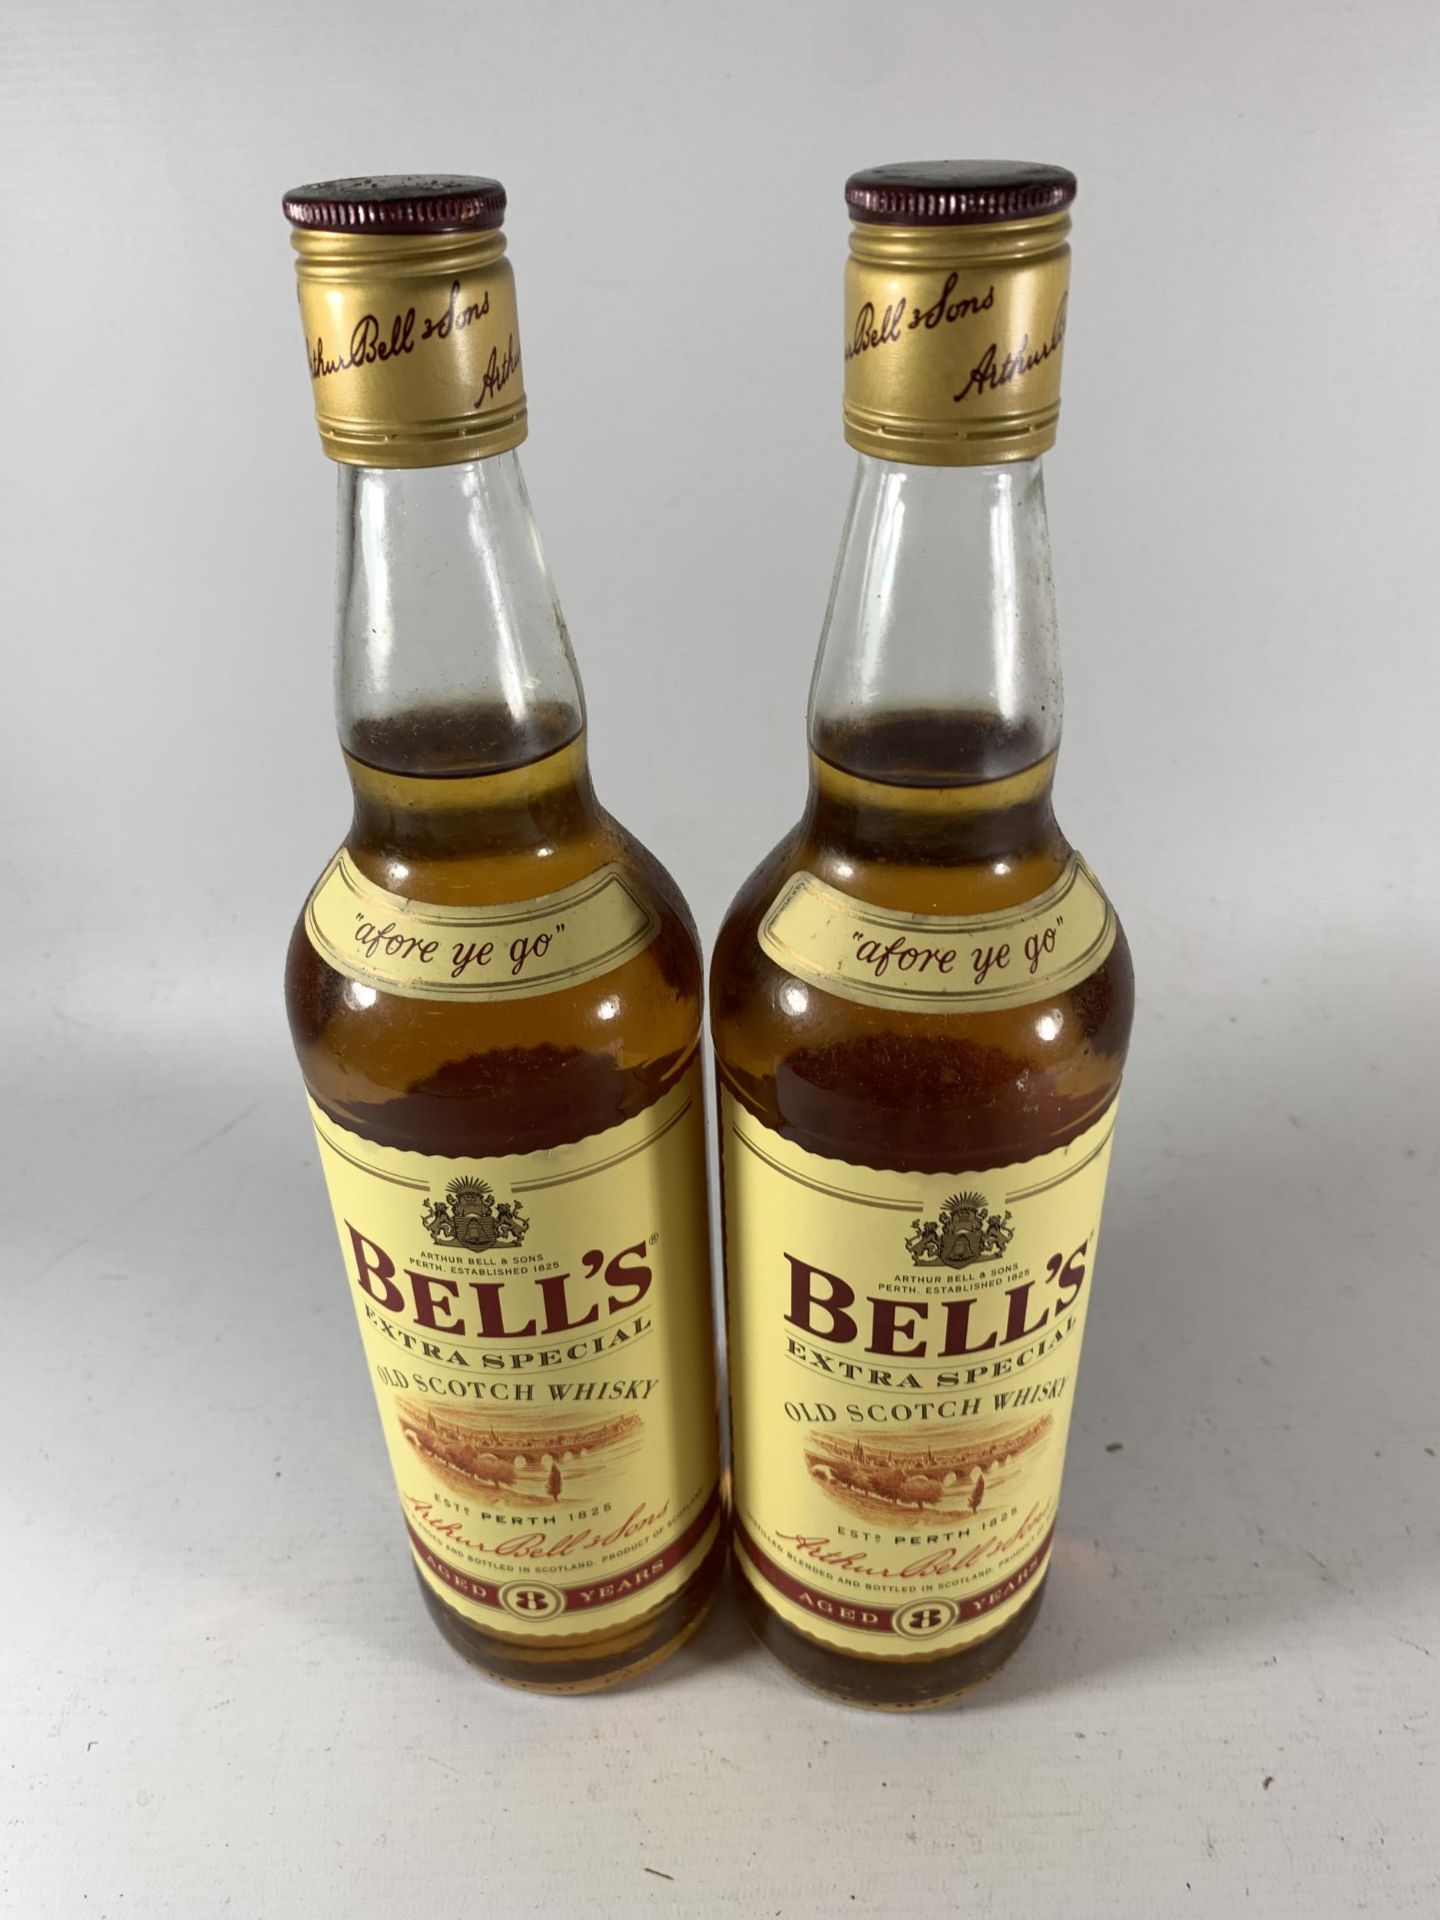 2 X 70CL BOTTLE - BELL'S EXTRA SPECIAL AGED 8 YEARS OLD SCOTCH WHISKY